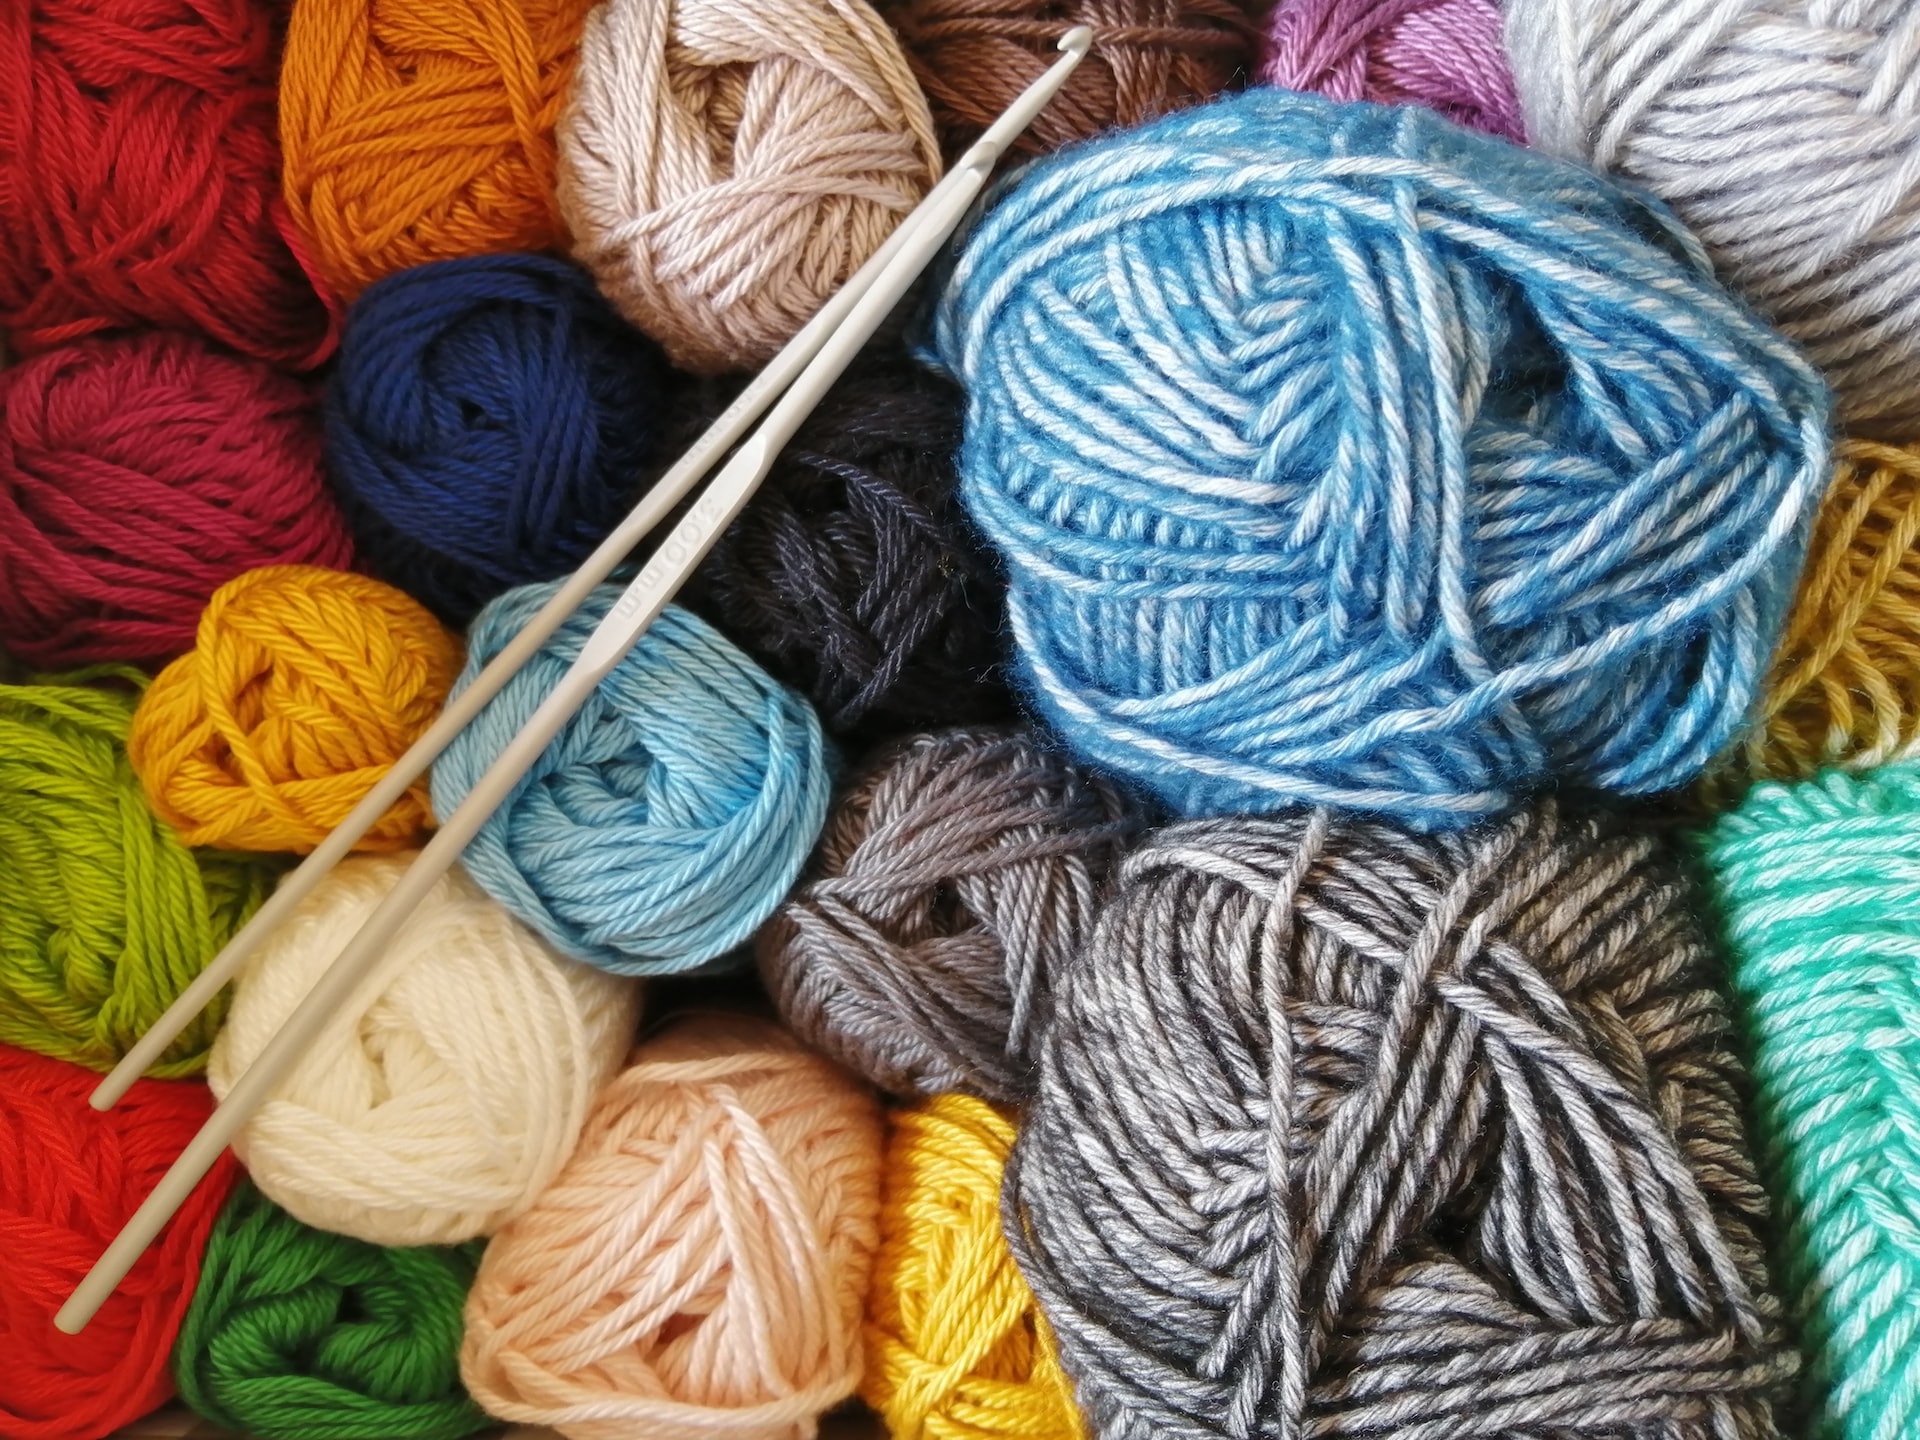 photo of balls of yarn in various colors with two crochet hooks